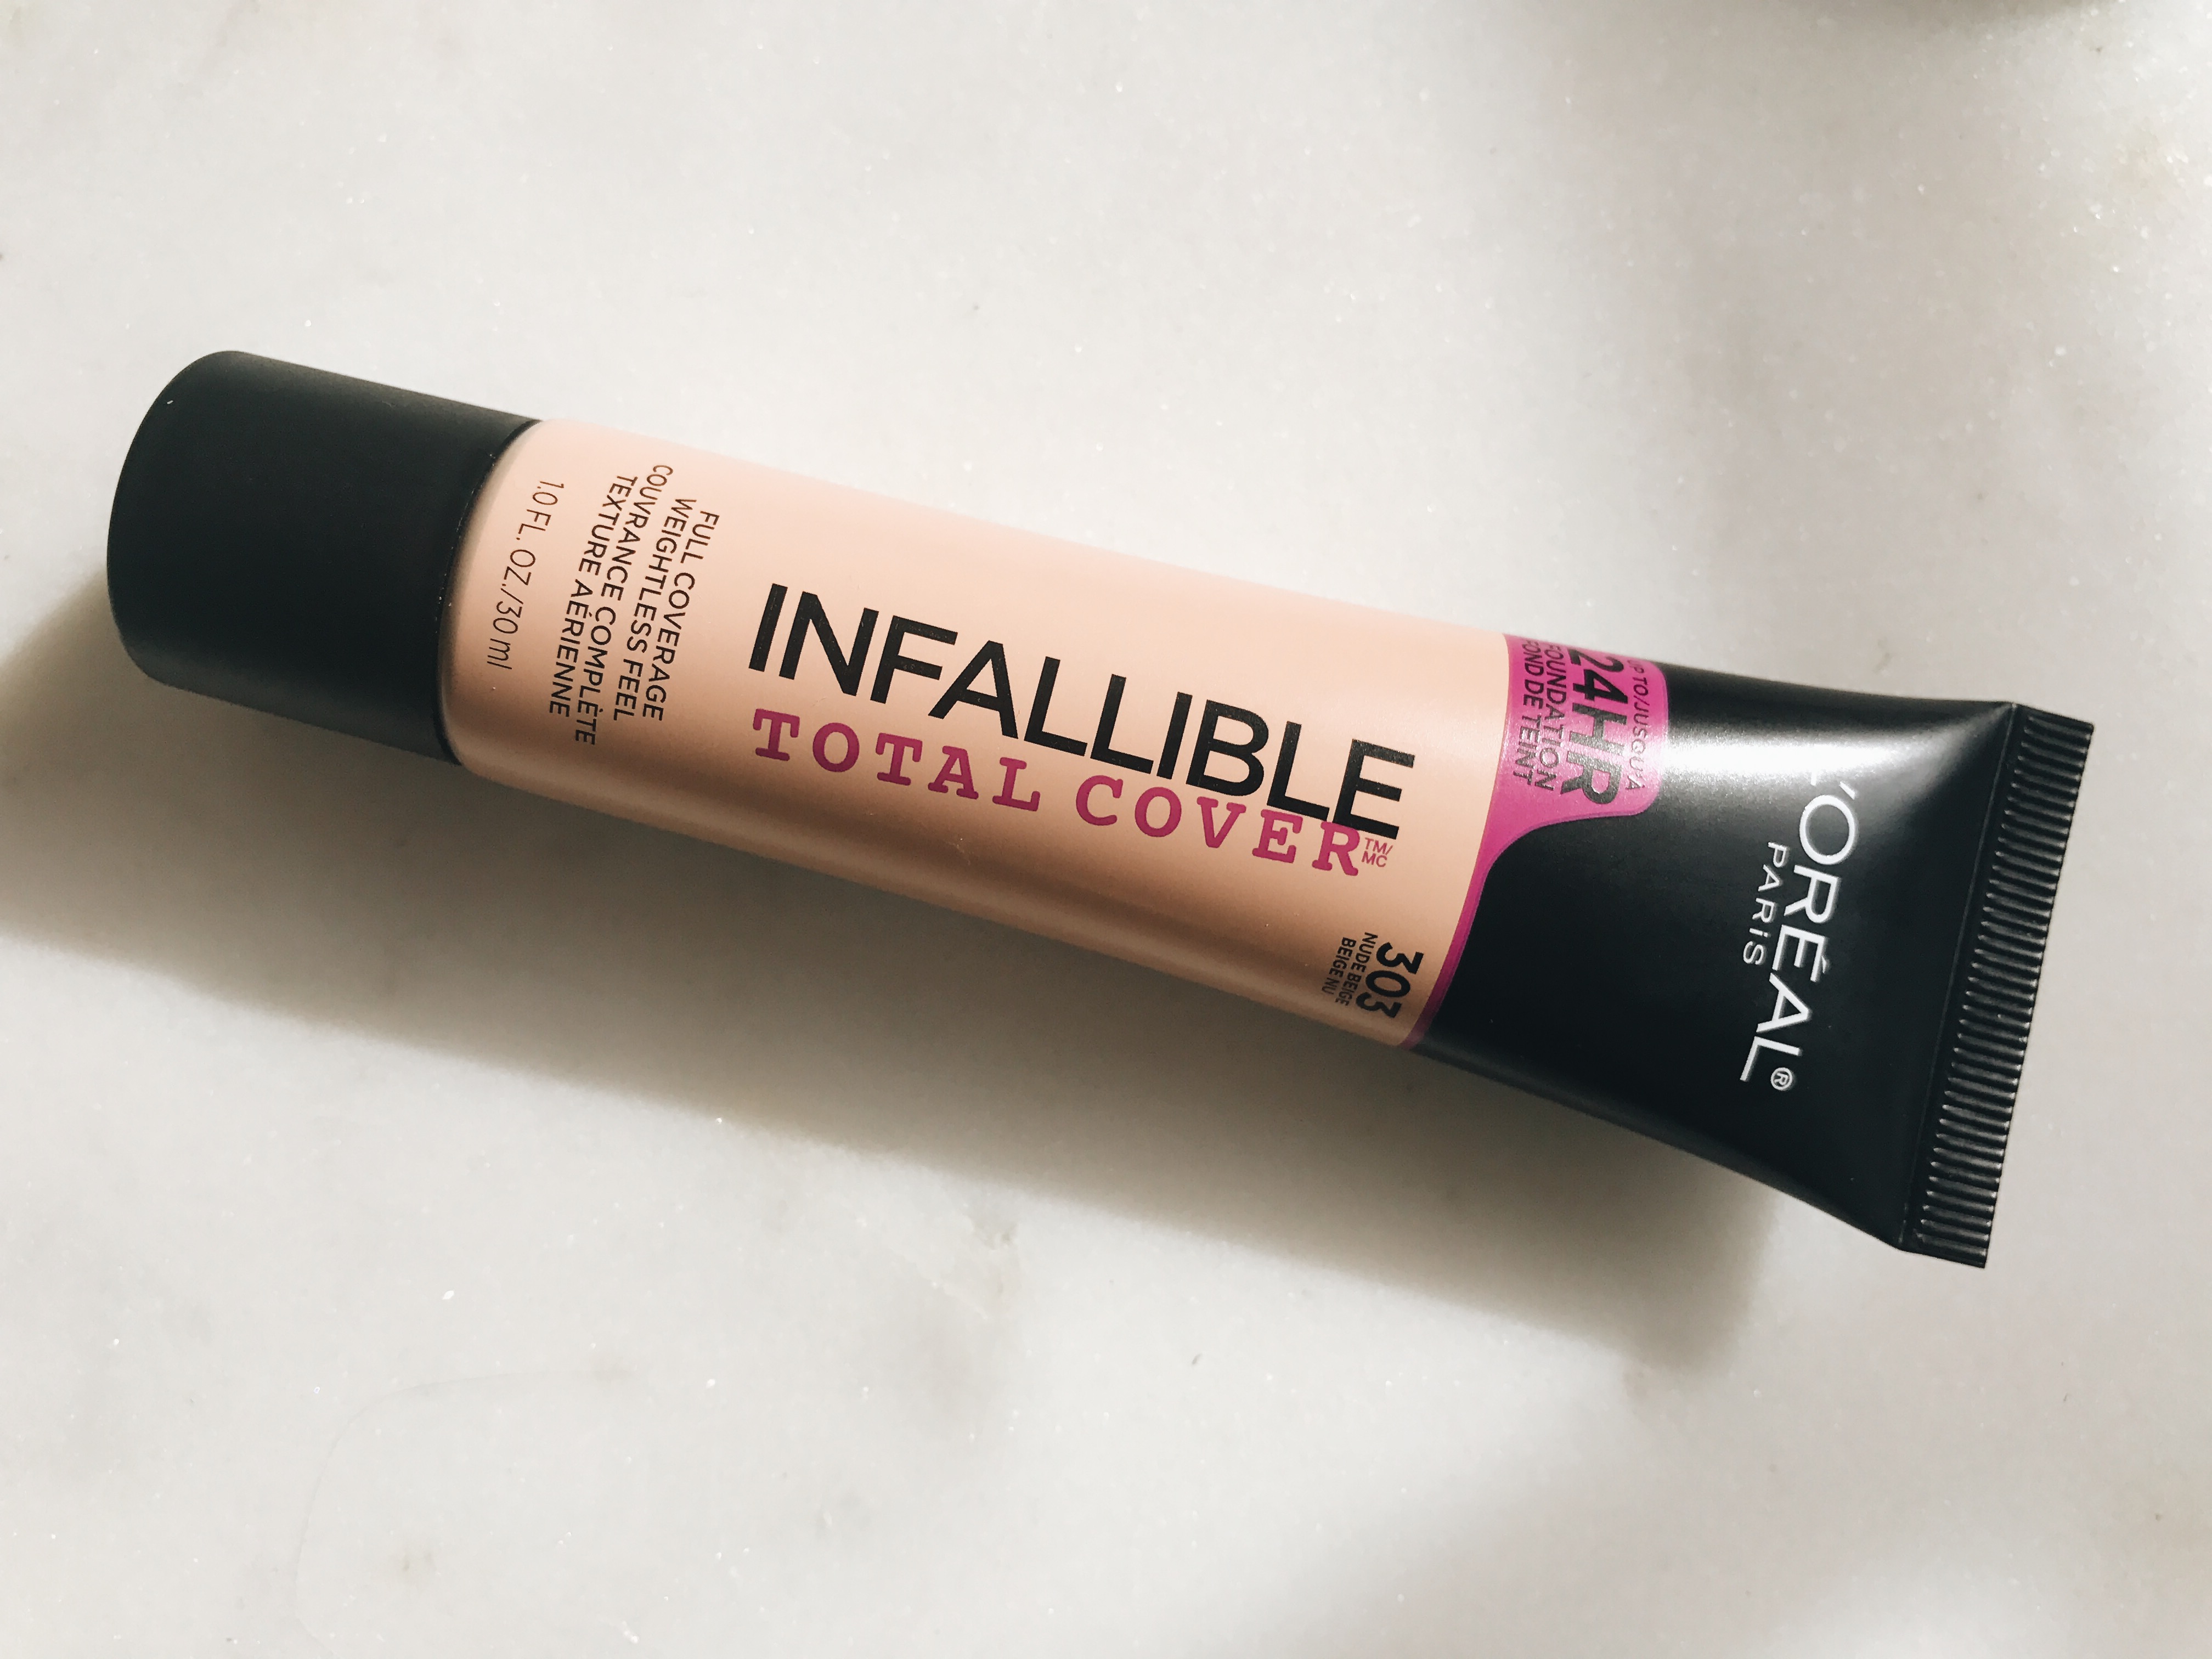 LOreal Infallible Total Cover Foundation & LOreal 